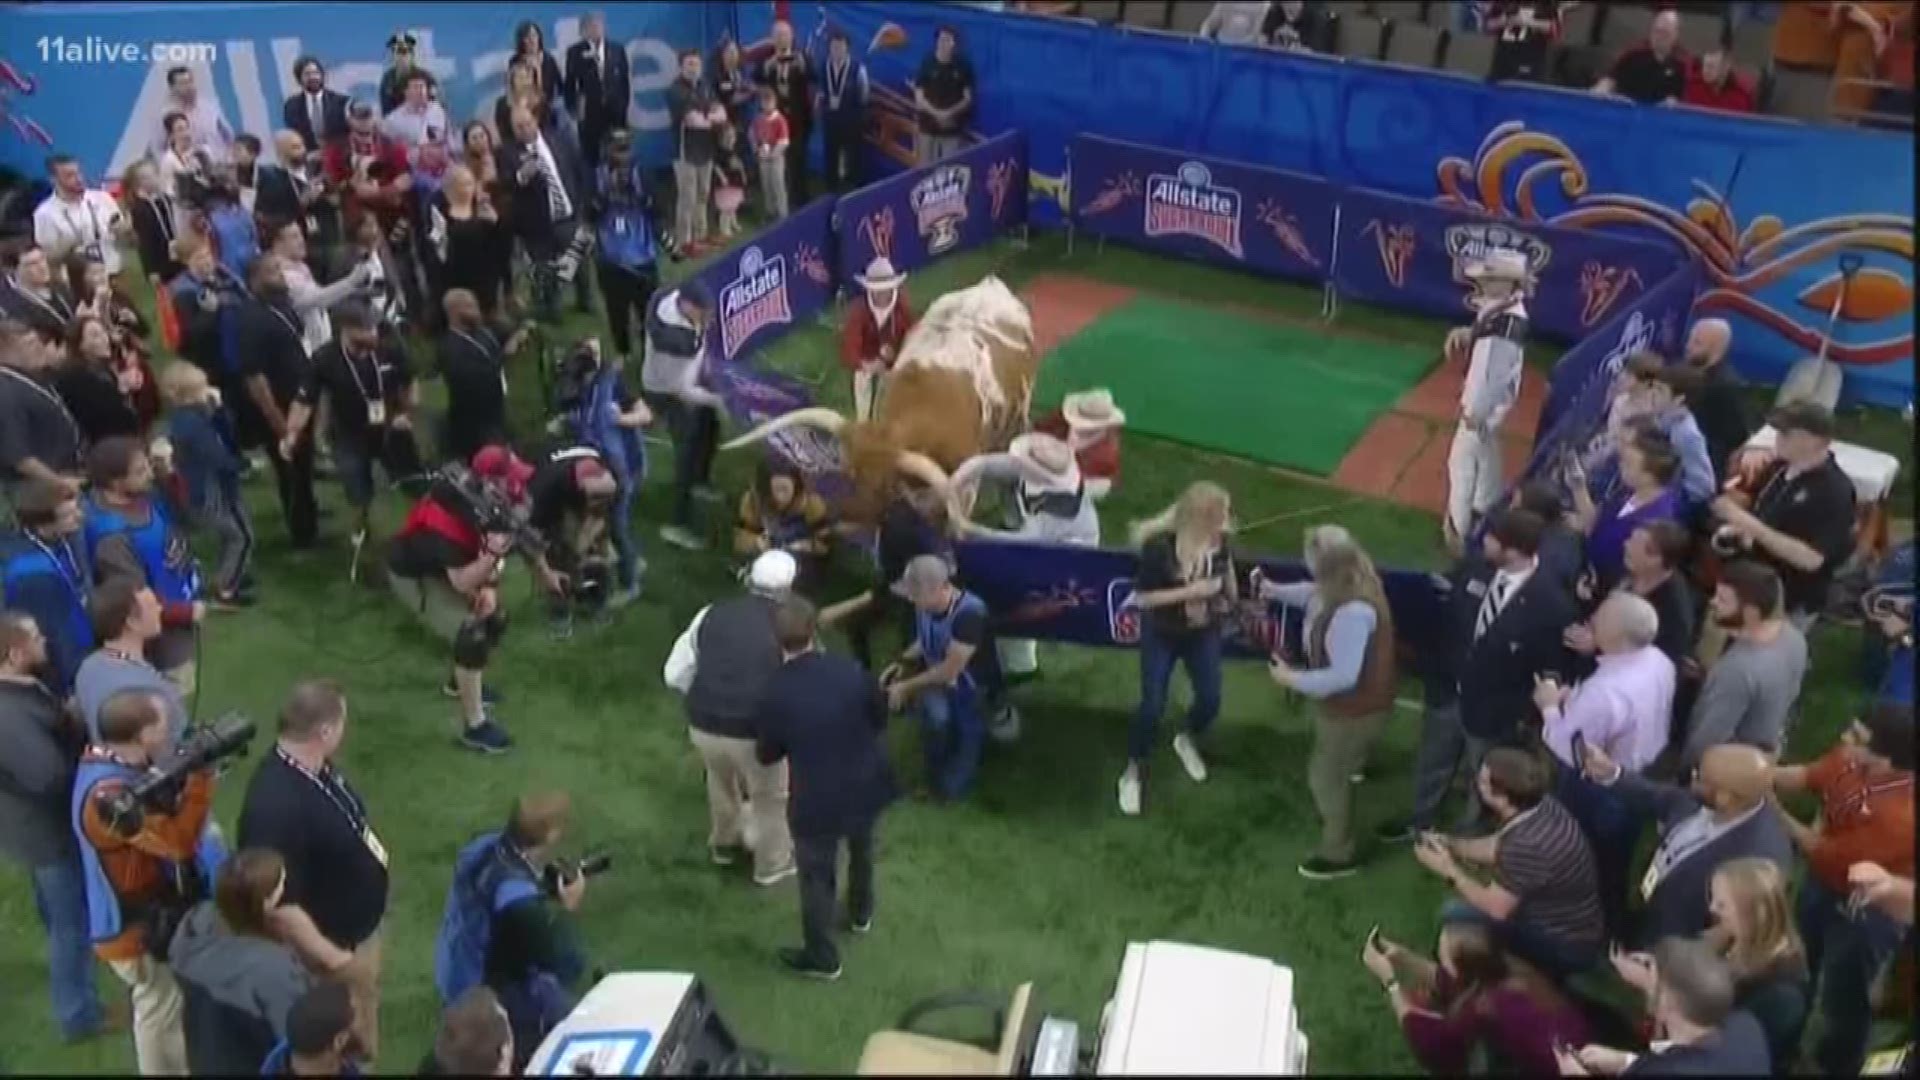 Bevo, the Texas Longhorns' longtime mascot, attacked Uga The Dog during the media's tight-quartered photo opportunity.